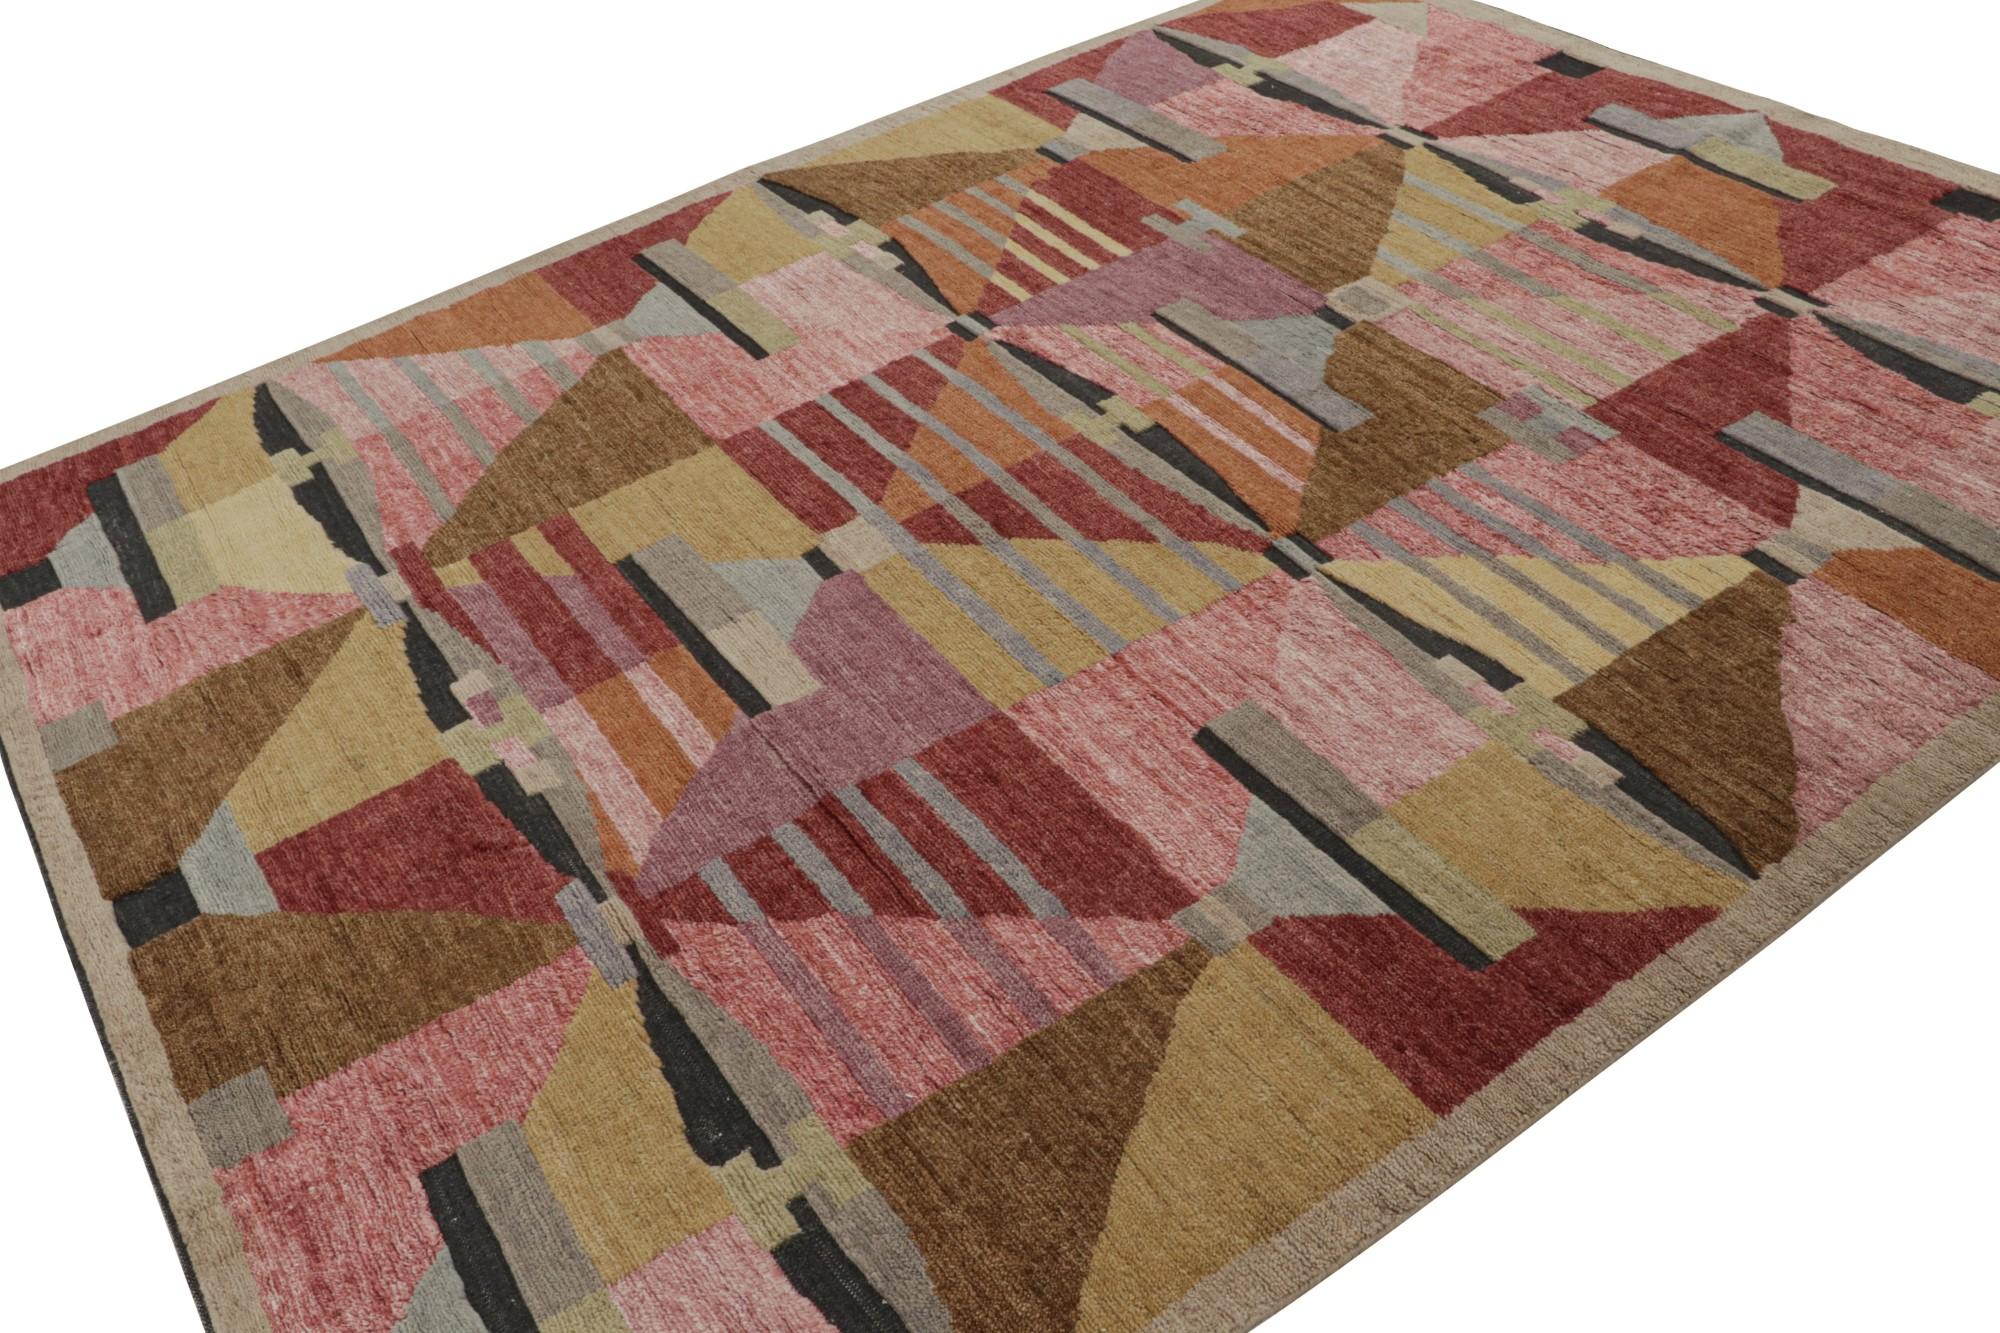 This rug design represents the Scandinavian Collection by Rug & Kilim—a modern take on the Swedish Deco style of Rollakan and Rya rugs. 

On the Design:

These photos represent an 8x10 rug in this design, hand-knotted in wool and bamboo silk with